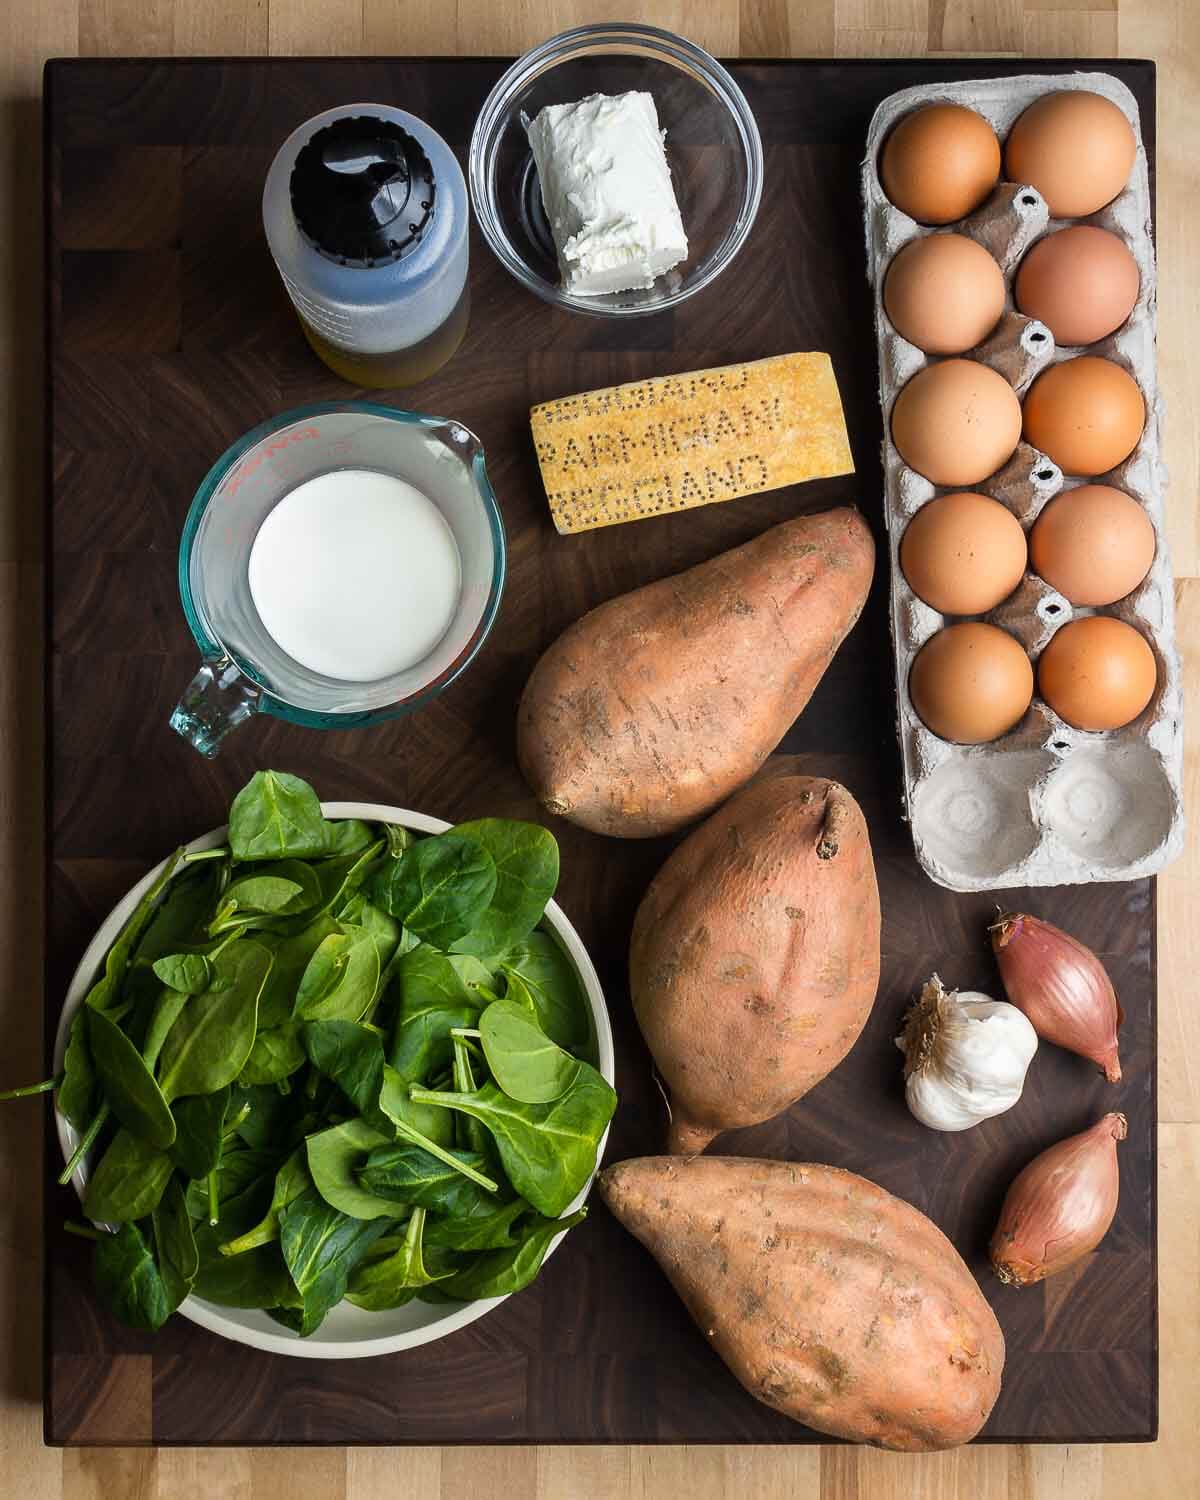 Ingredients shown: olive oil, goat cheese, parmesan, milk, eggs, sweet potatoes, spinach, garlic, and shallots.